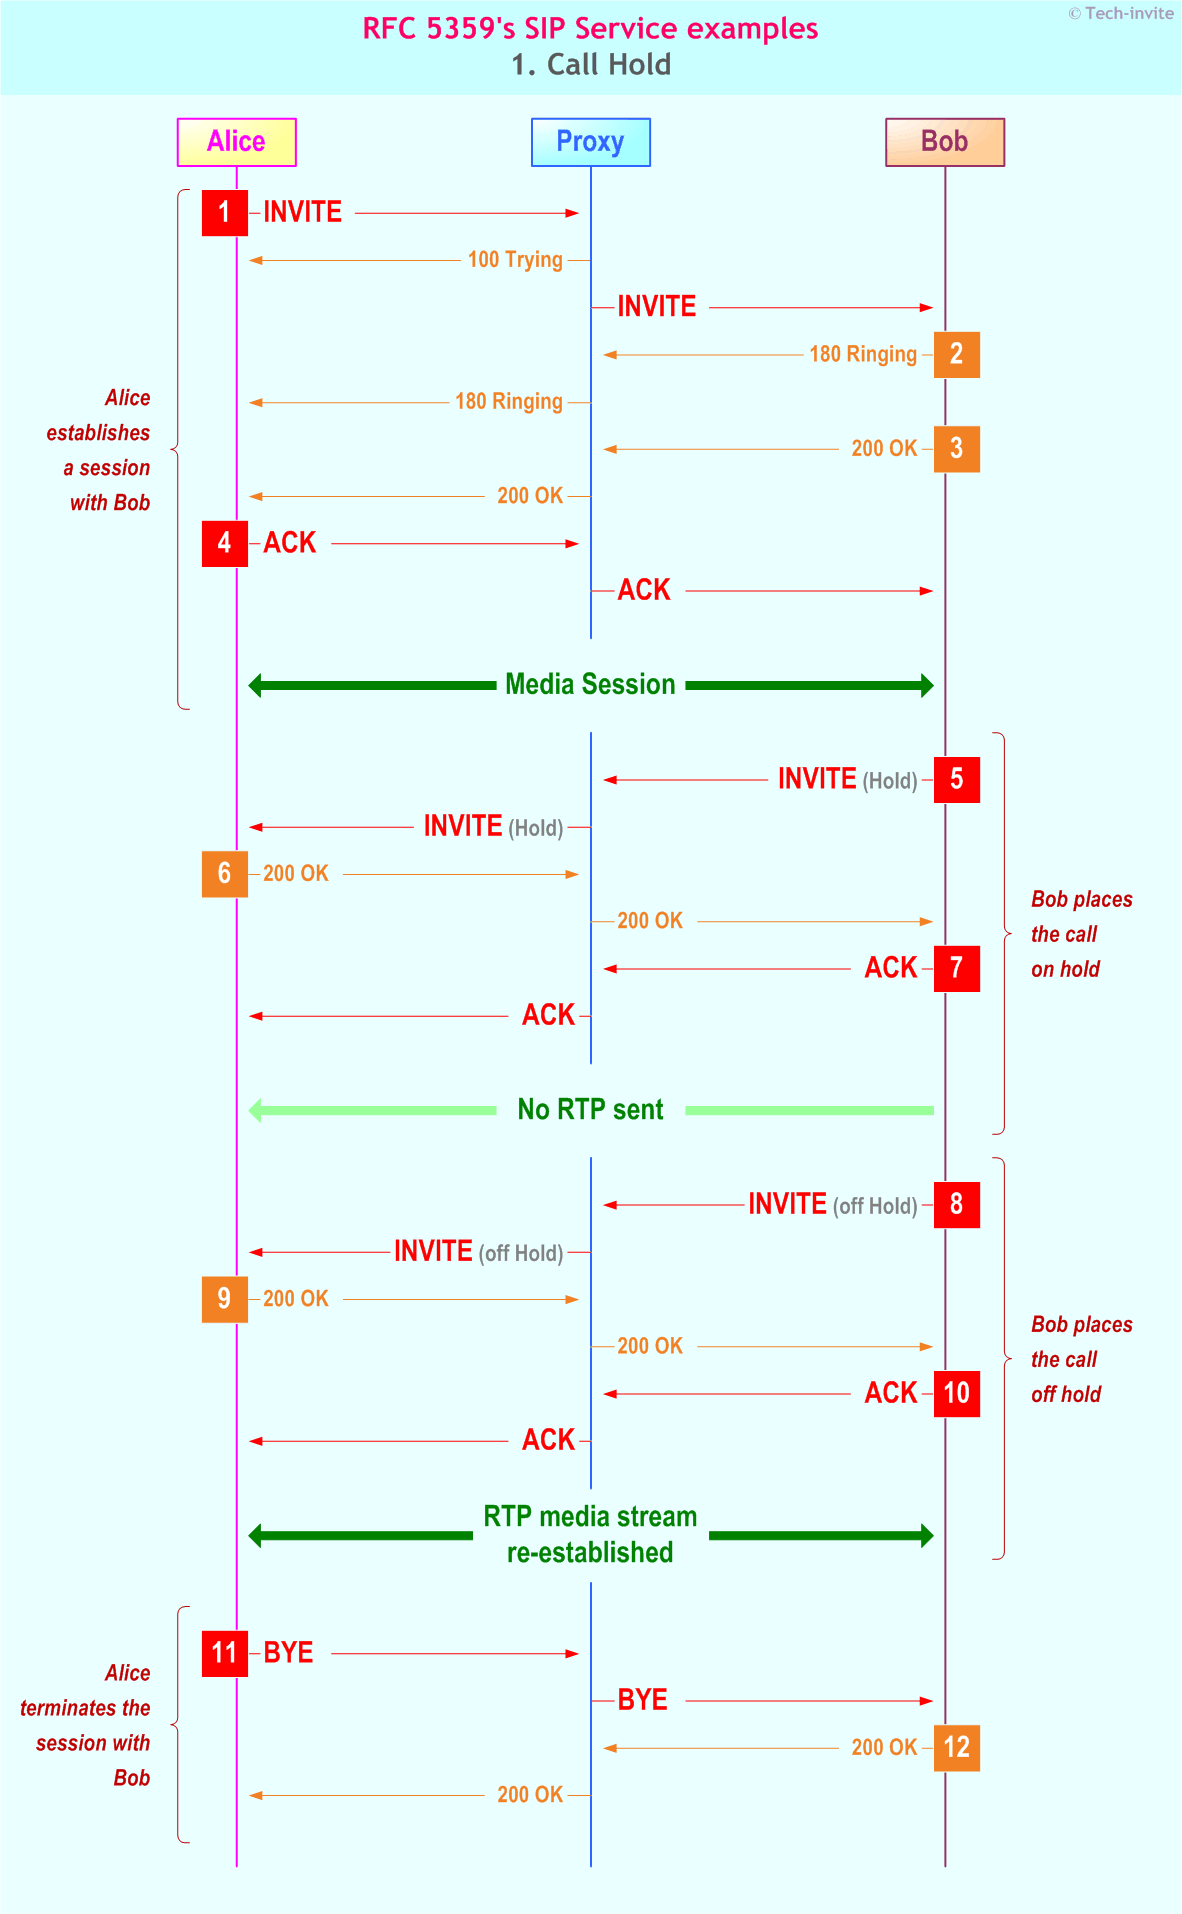 Sequence Chart